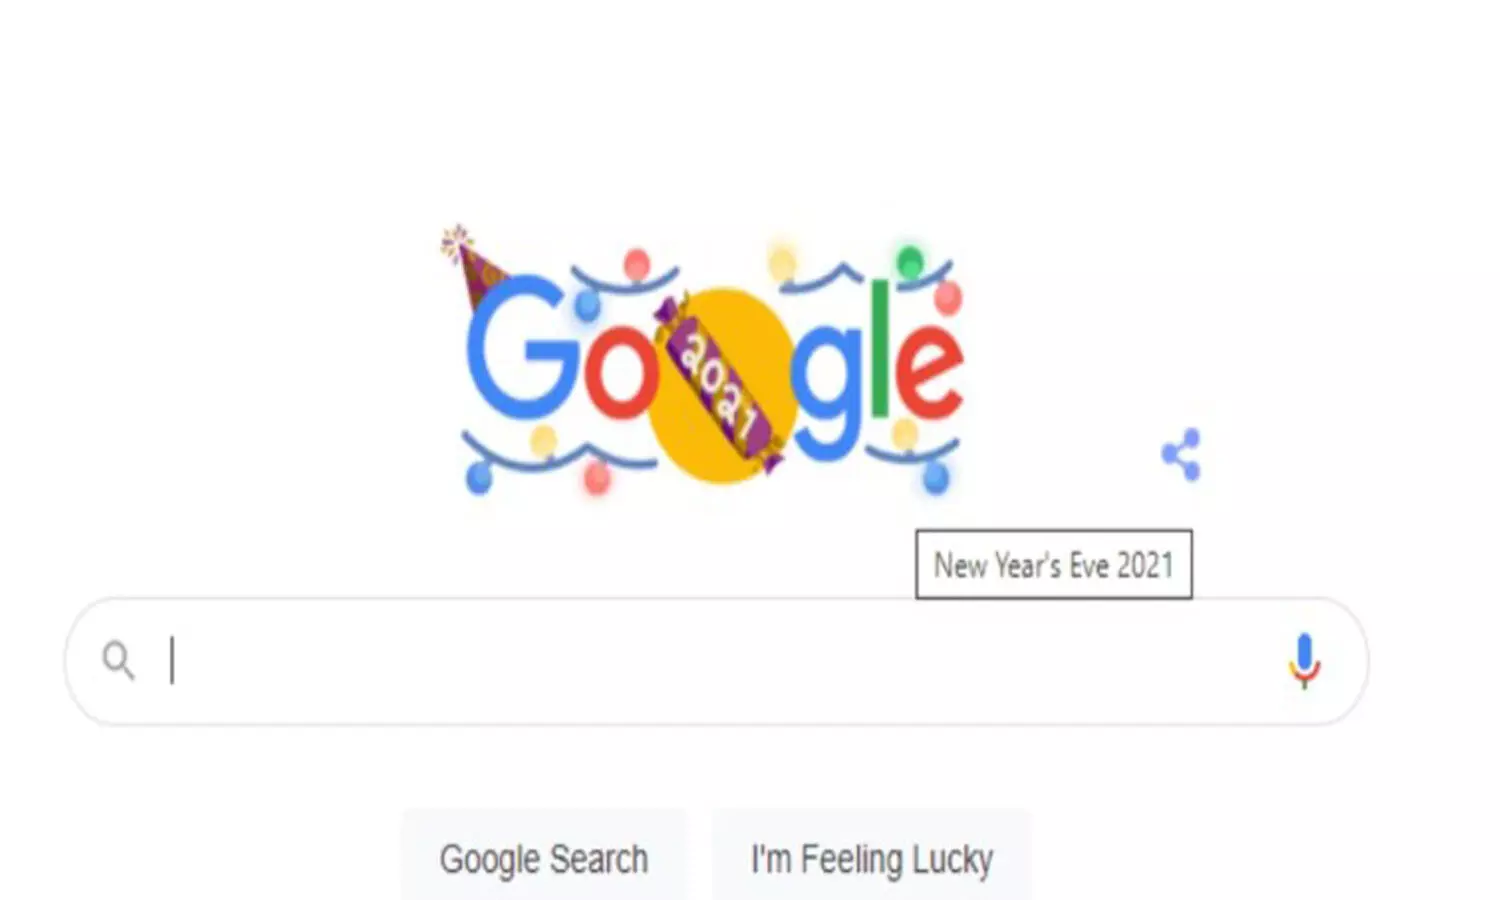 New Years Eve 2021: Google prepares for year-end bang with festive doodle